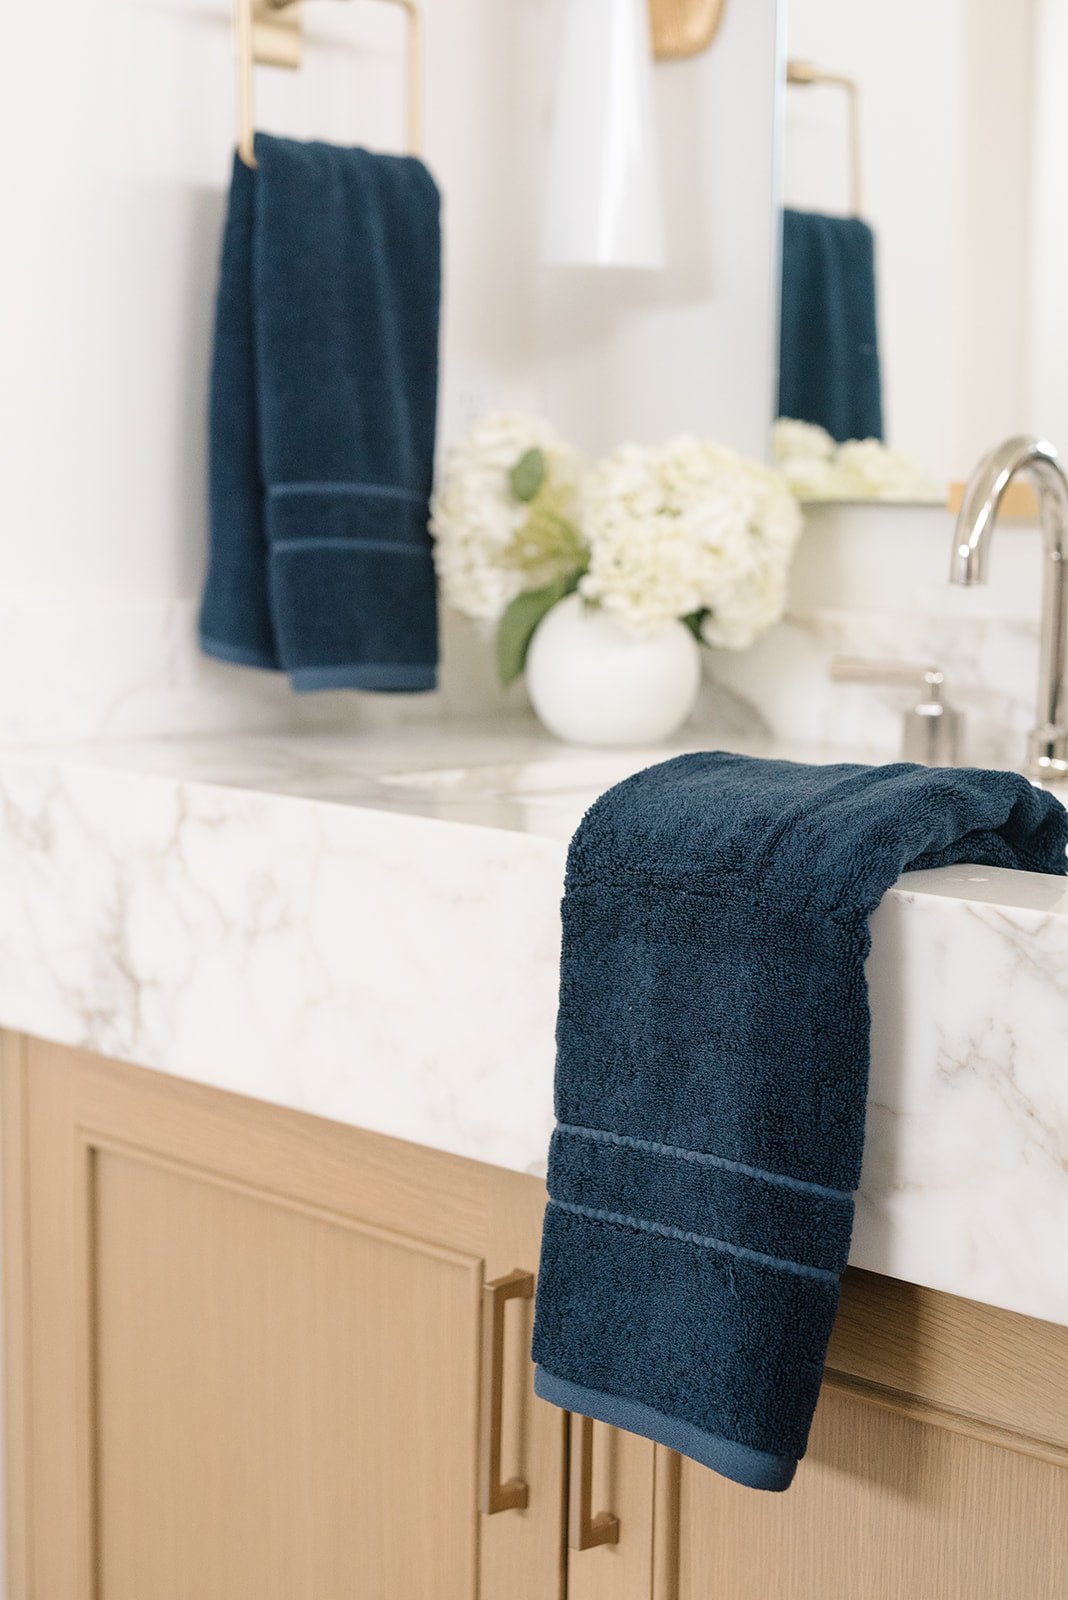 Premium Plush Hand Towel in the color Dusk. Photo of Dusk Premium Plush Hand Towel taken in a bathroom. one Premium Plush Hand Towel is hanging from a towel ring while the other is resting on the sink in the bathroom. |Color:Dusk